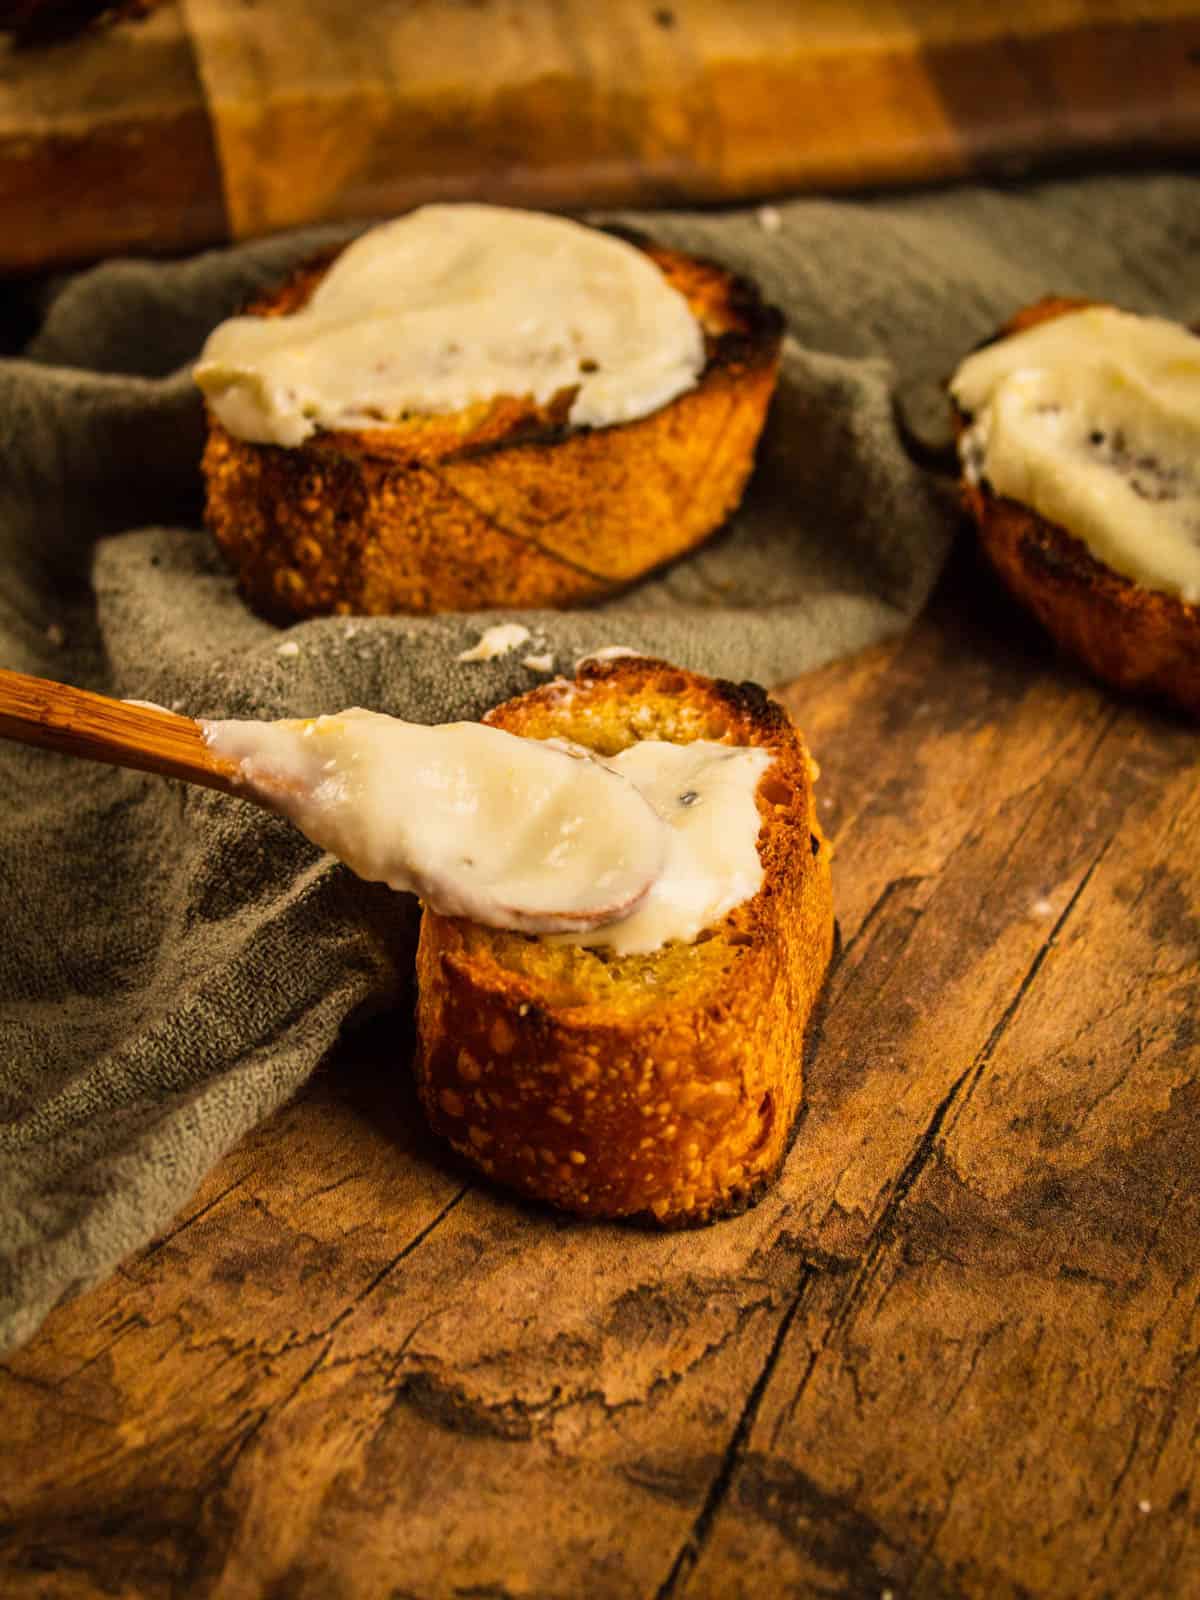 small wooden spoon dropping ricotta spread on baguette slice